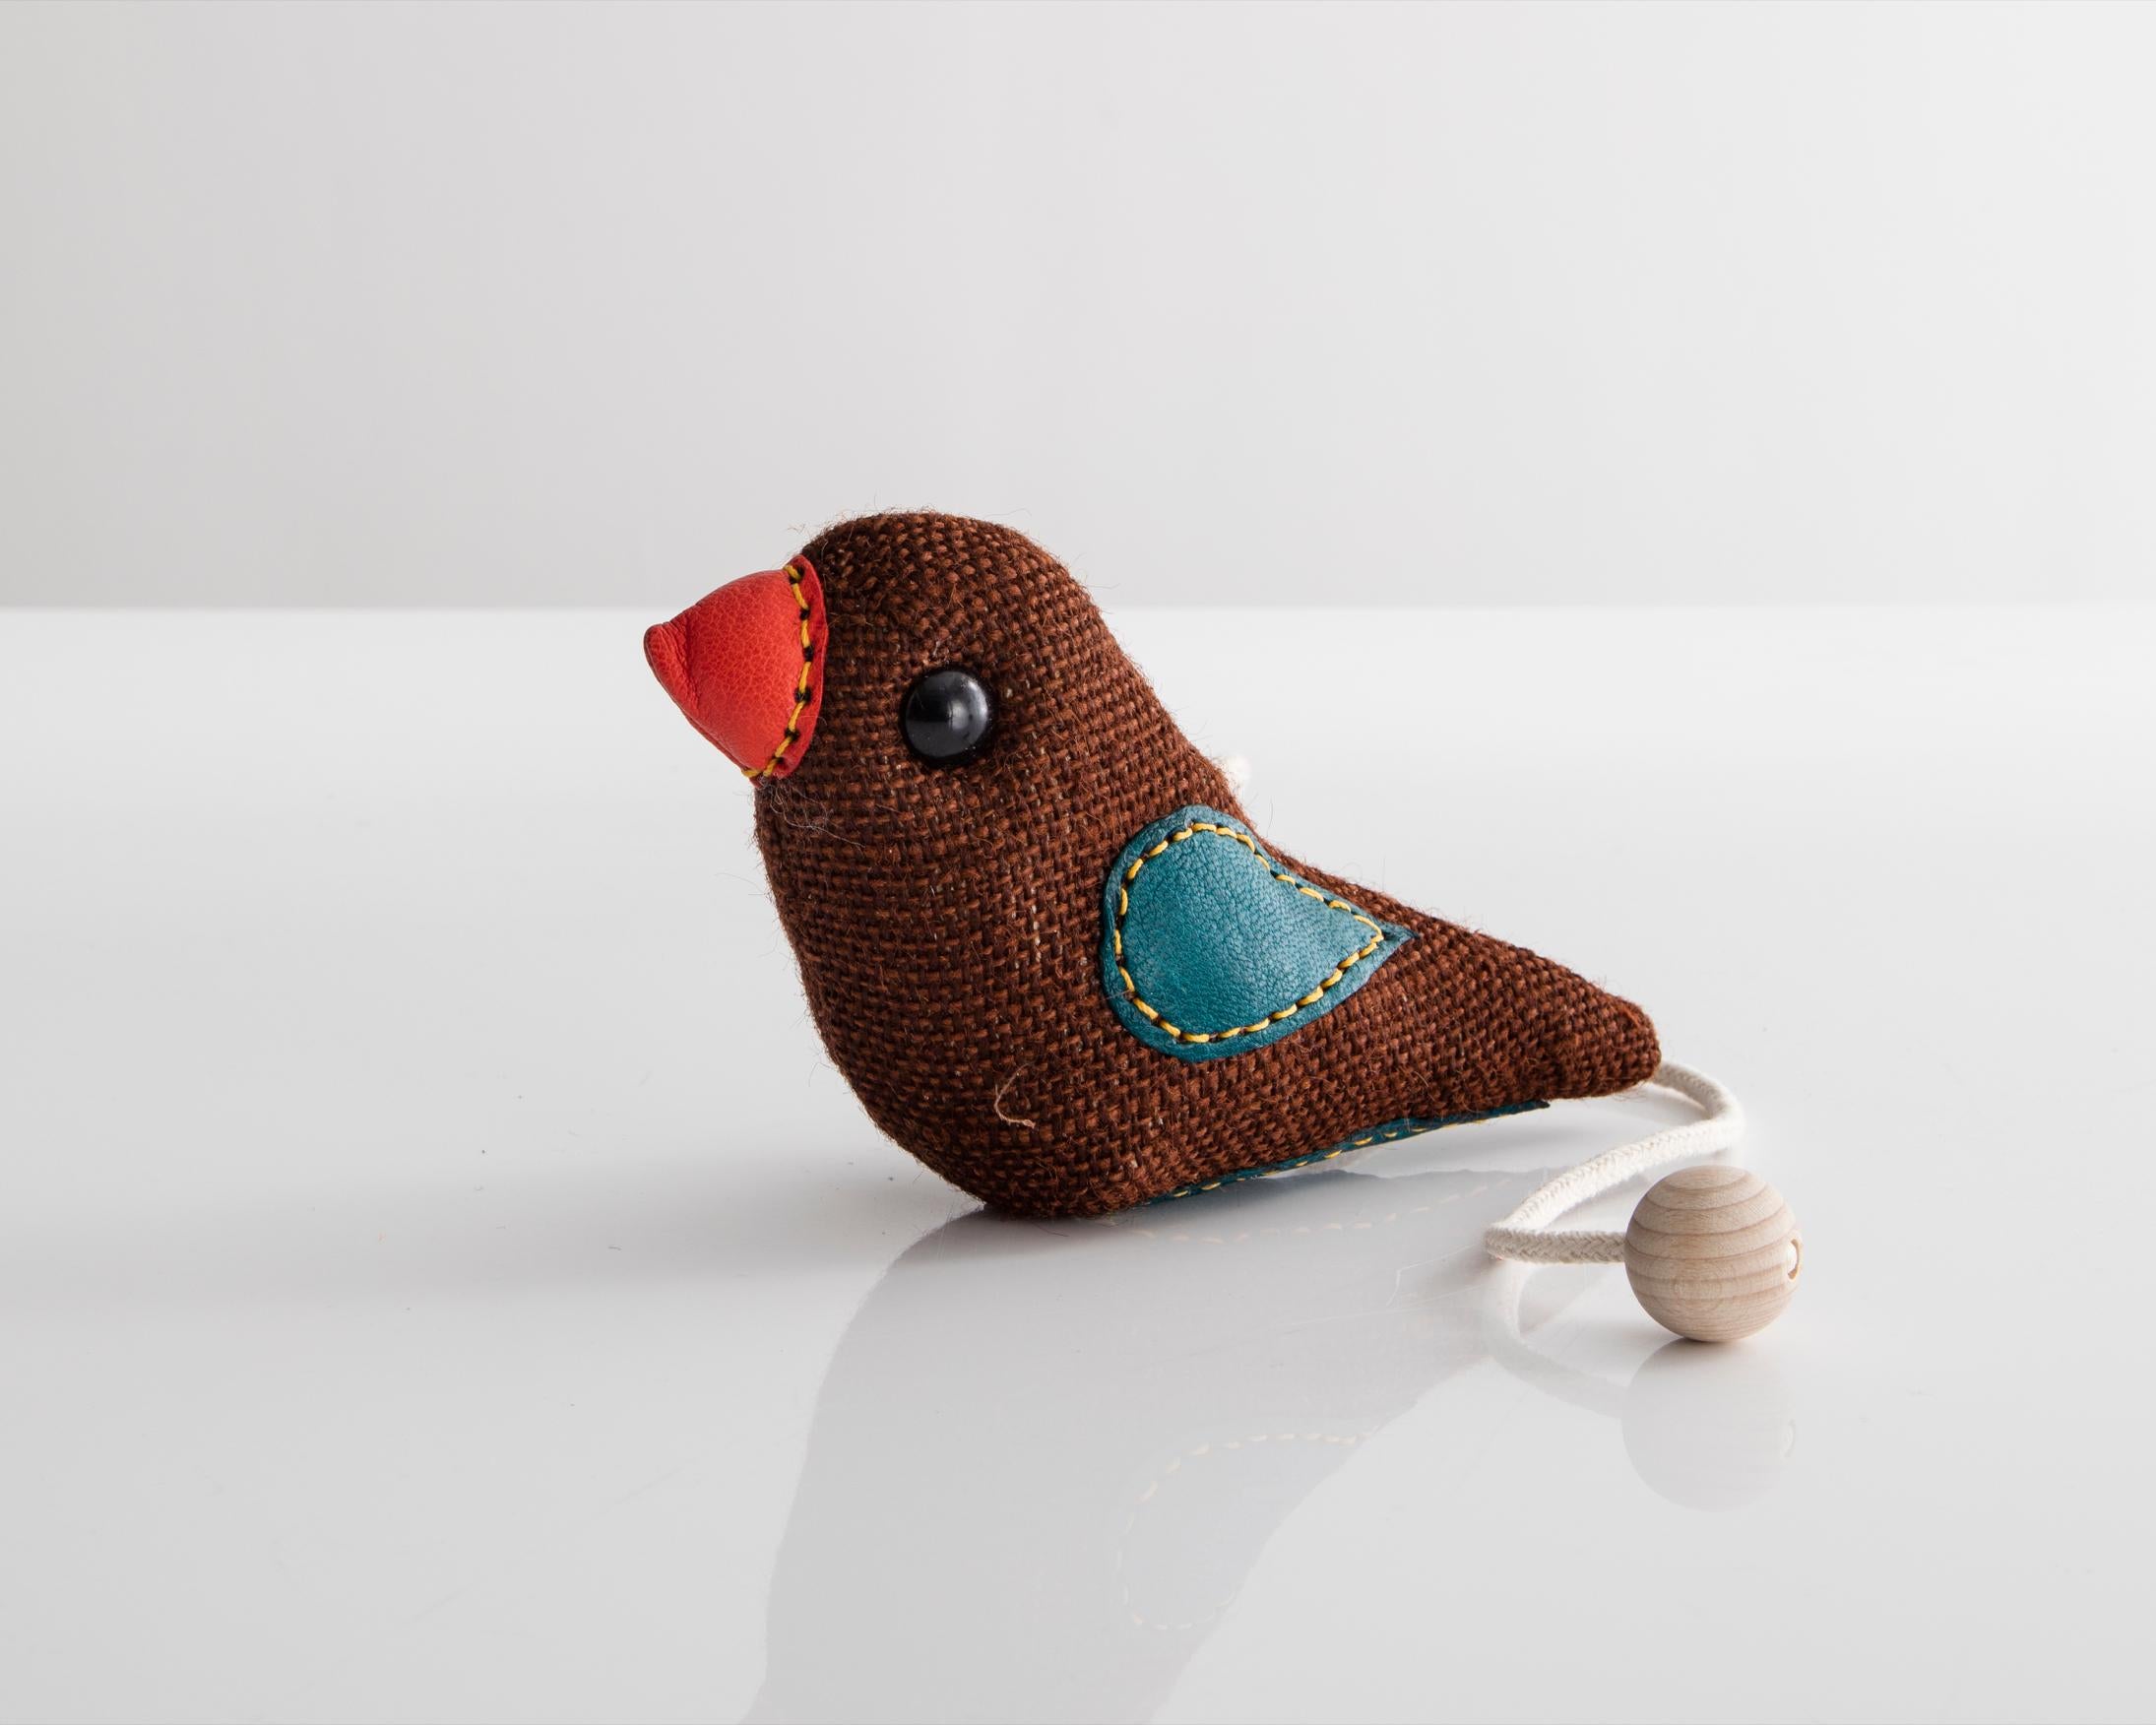 Therapeutic Toy Bird in brown jute with leather detailing. Originally designed and made by Renate Müller in 1981/82. This example made by Renate Müller, Germany, 2016.
 